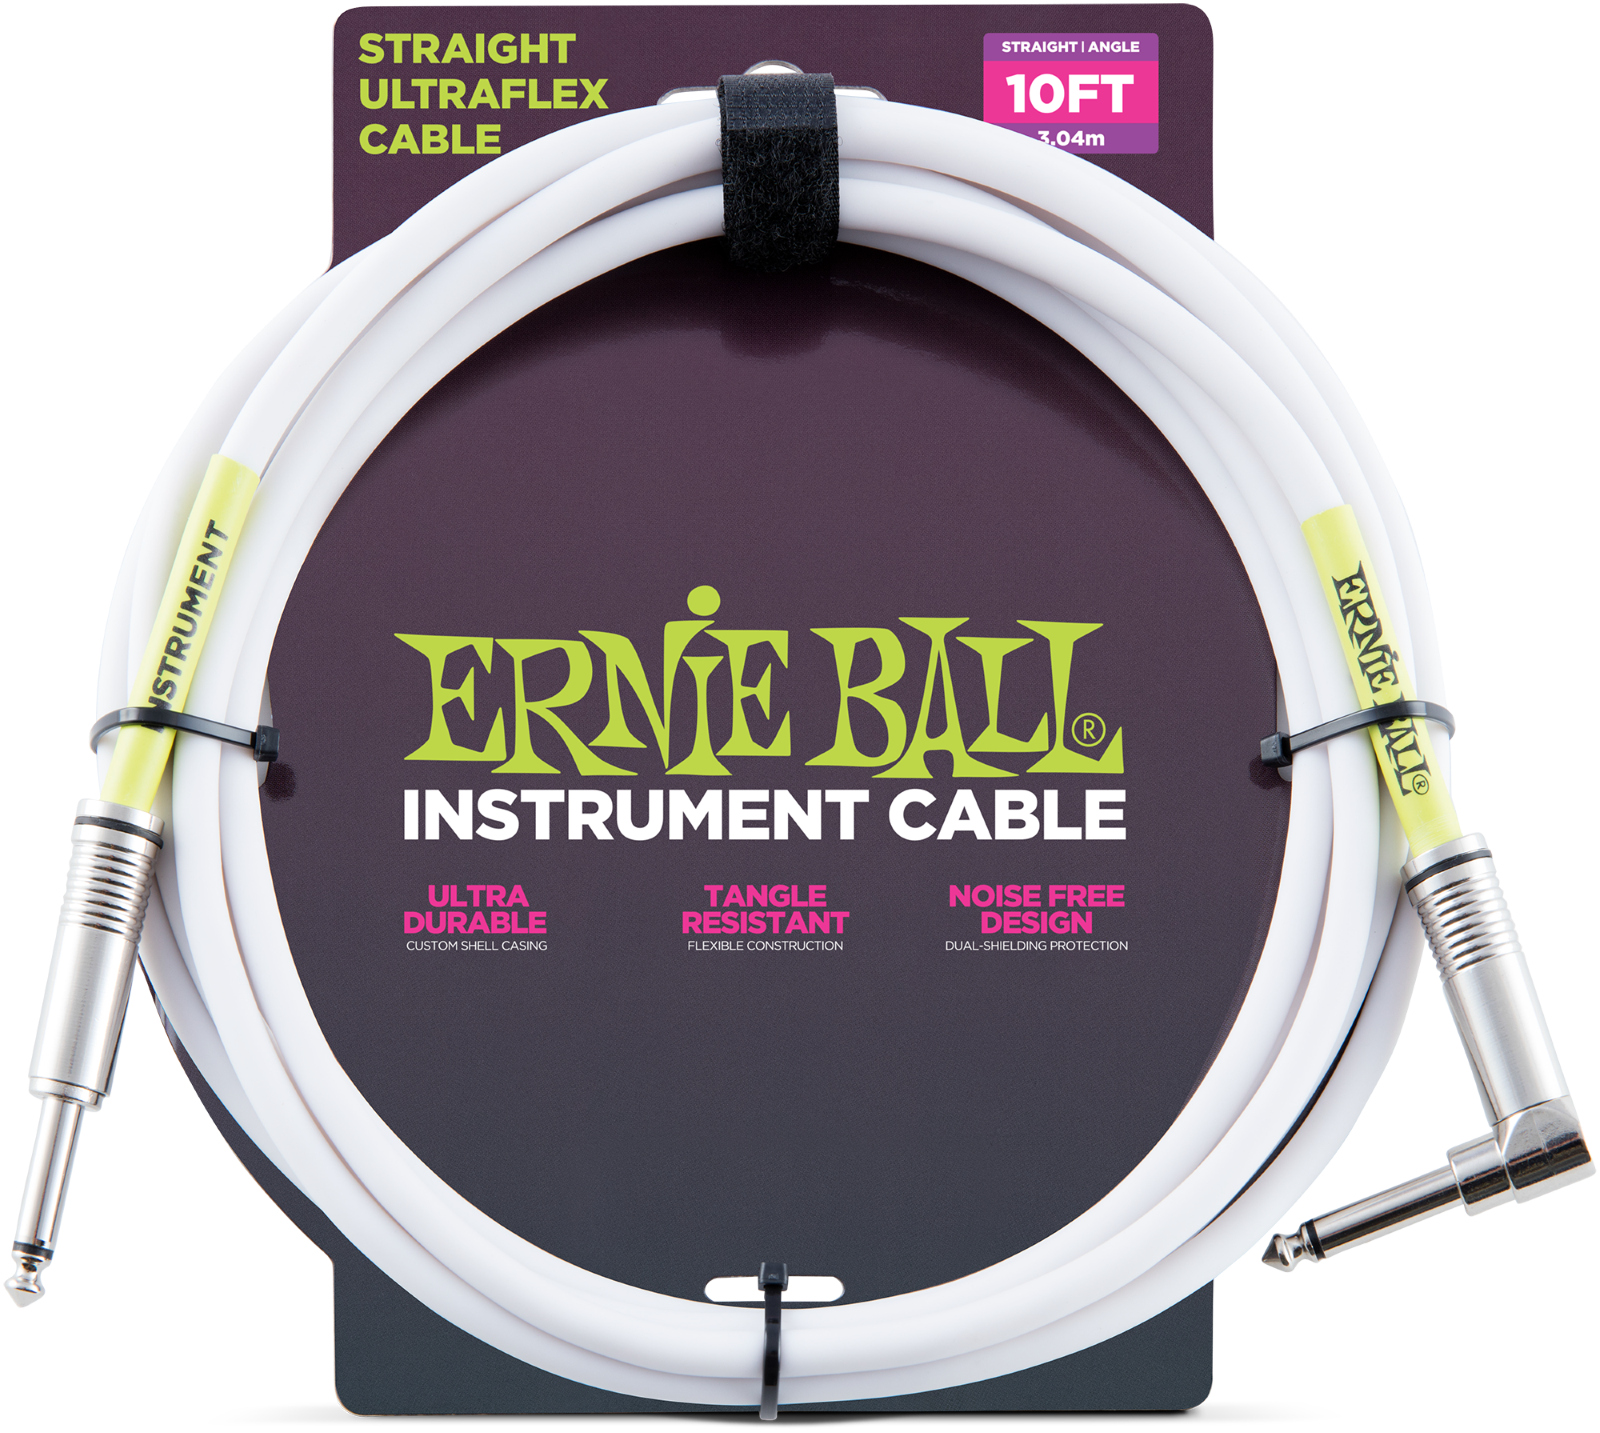 Ernie Ball Instrument Cable, Straight / Angled, White, 3.04m : photo 1